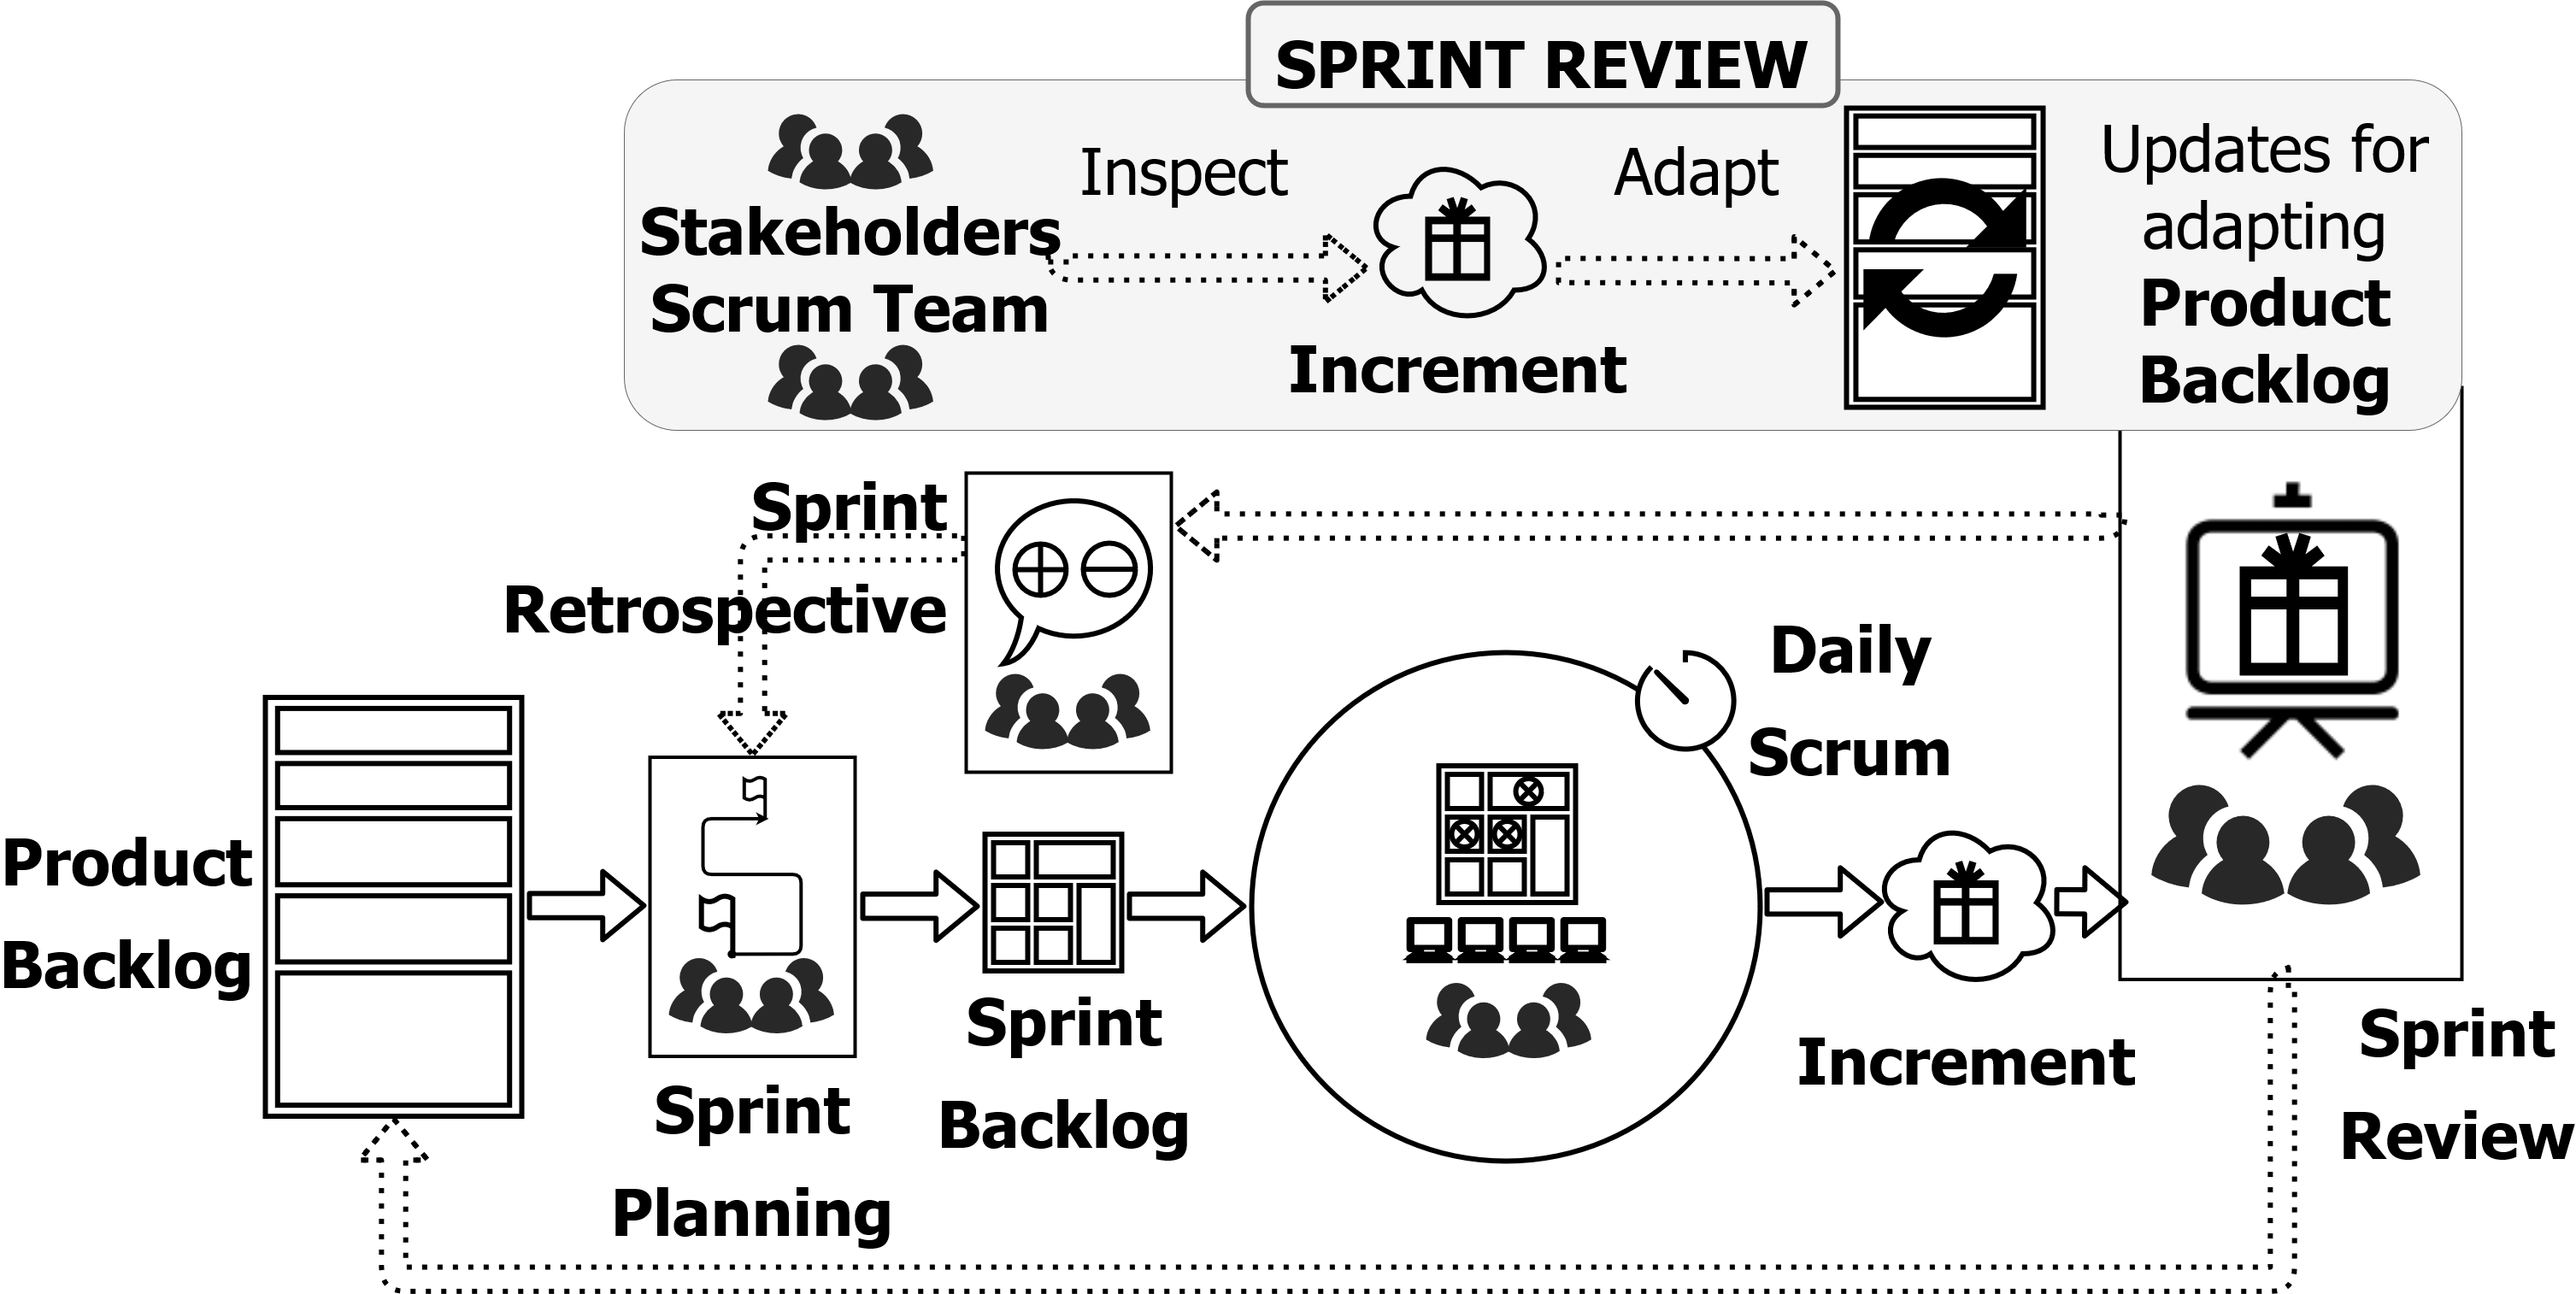 Sprin Review in Sprint.